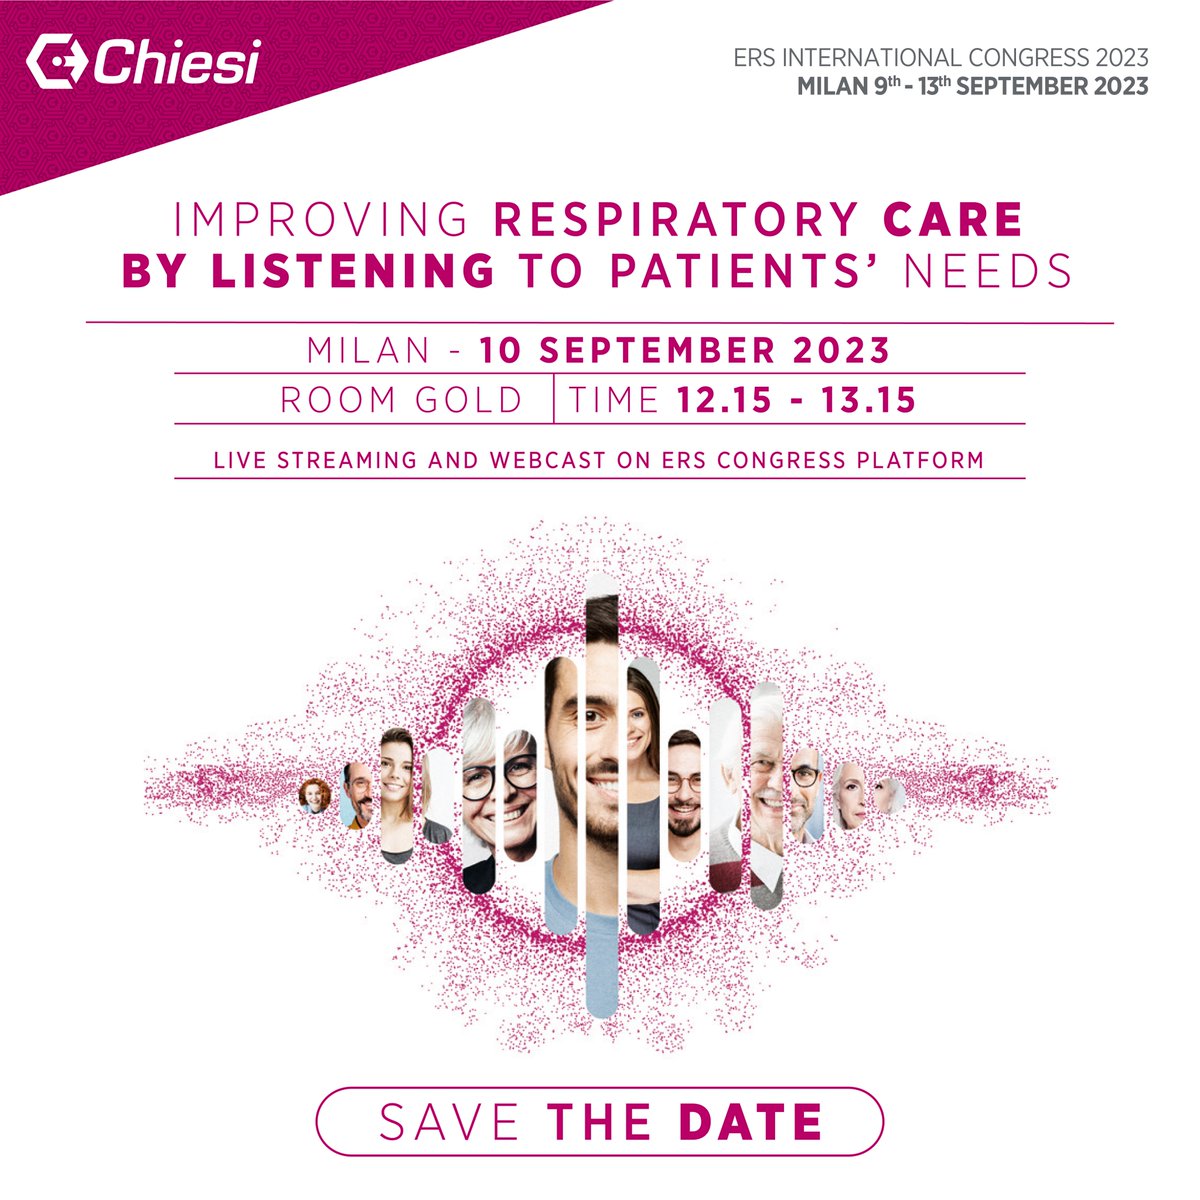 Save the date! At ERS Congress 2023, Chiesi will host a symposium focusing on “Improving respiratory care by listening to patients’ needs”, on Sunday 10th September. #CareBeyondTreatment #ERSCongress #ChiesiAIR